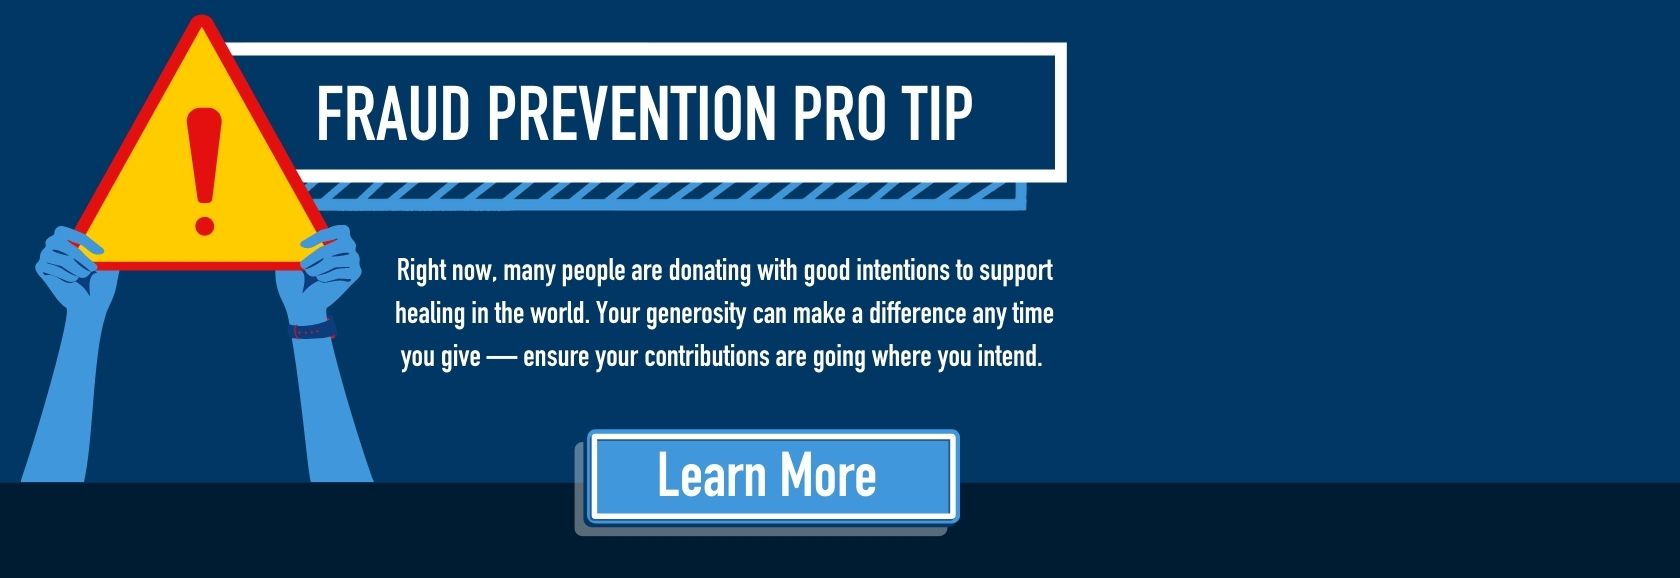 Fraud Prevention Tips to avoid charitable giving scams